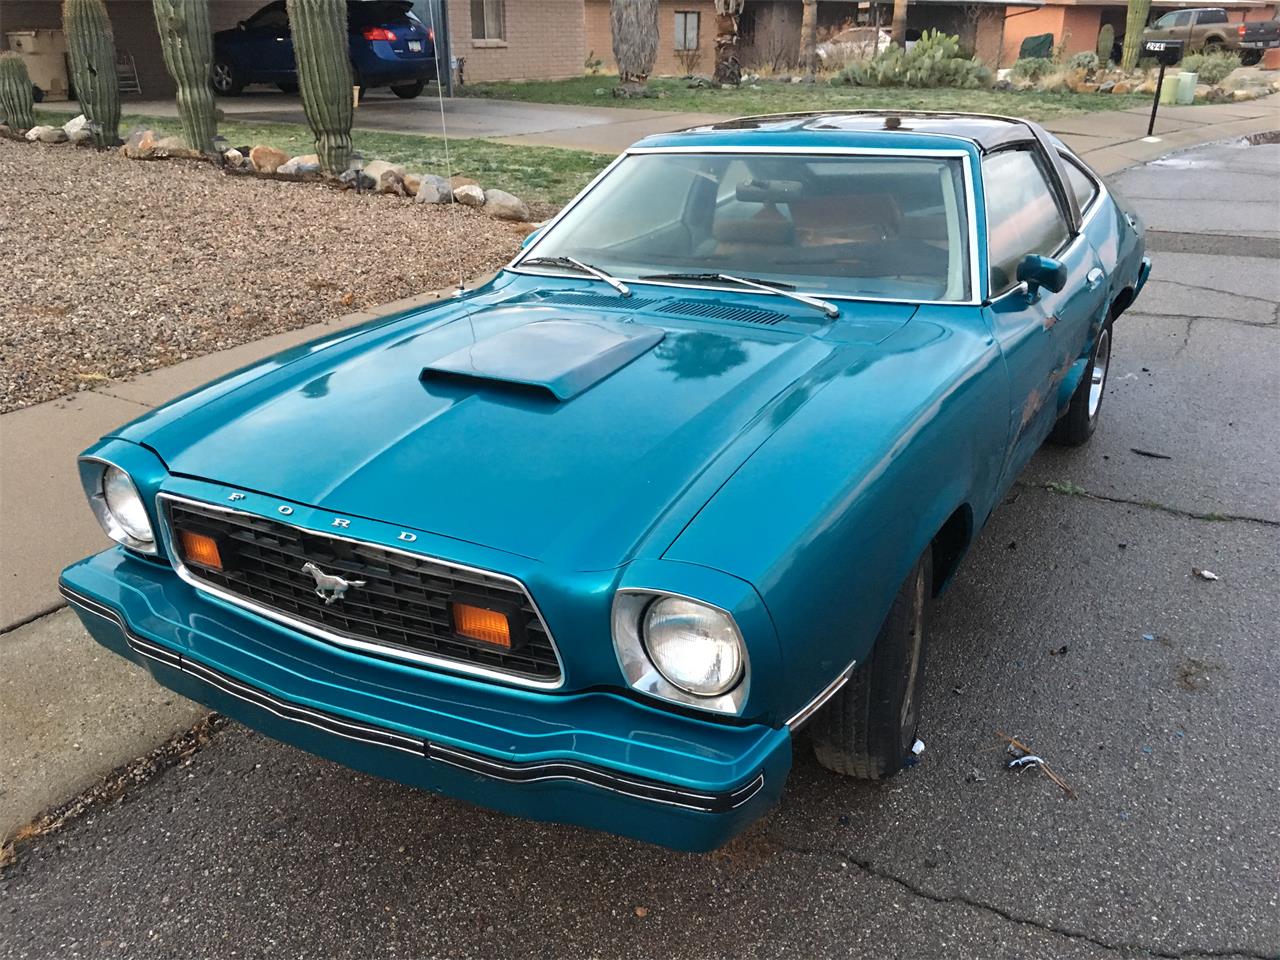 1978 Mustang Parts For Sale